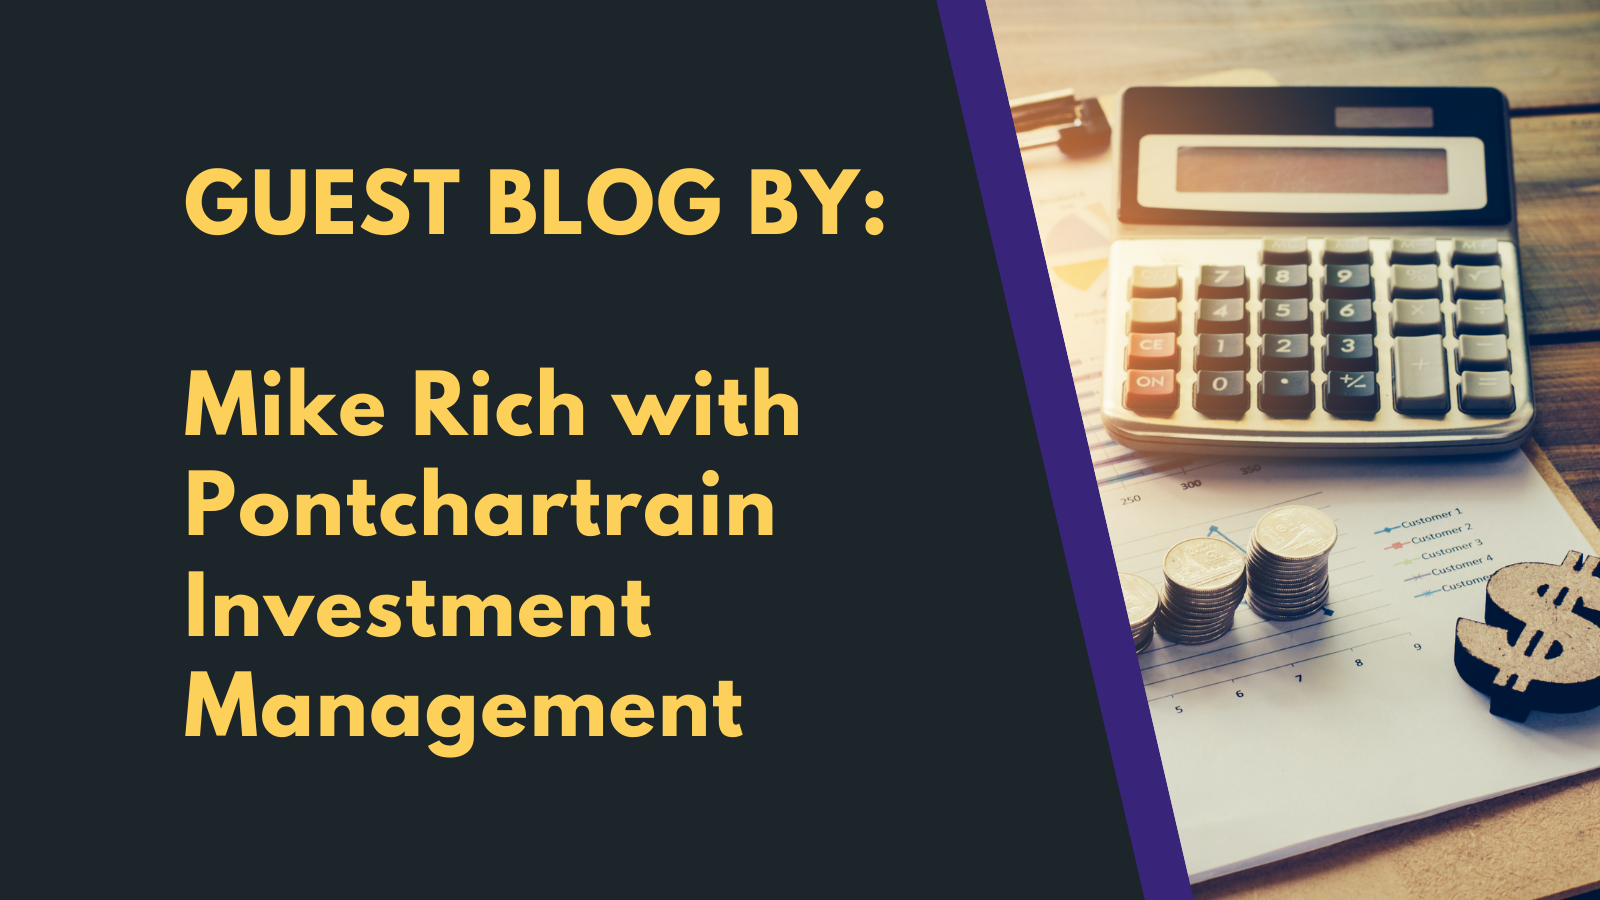 Guest Blog by: Mike Rich with Pontchartrain Investment Management